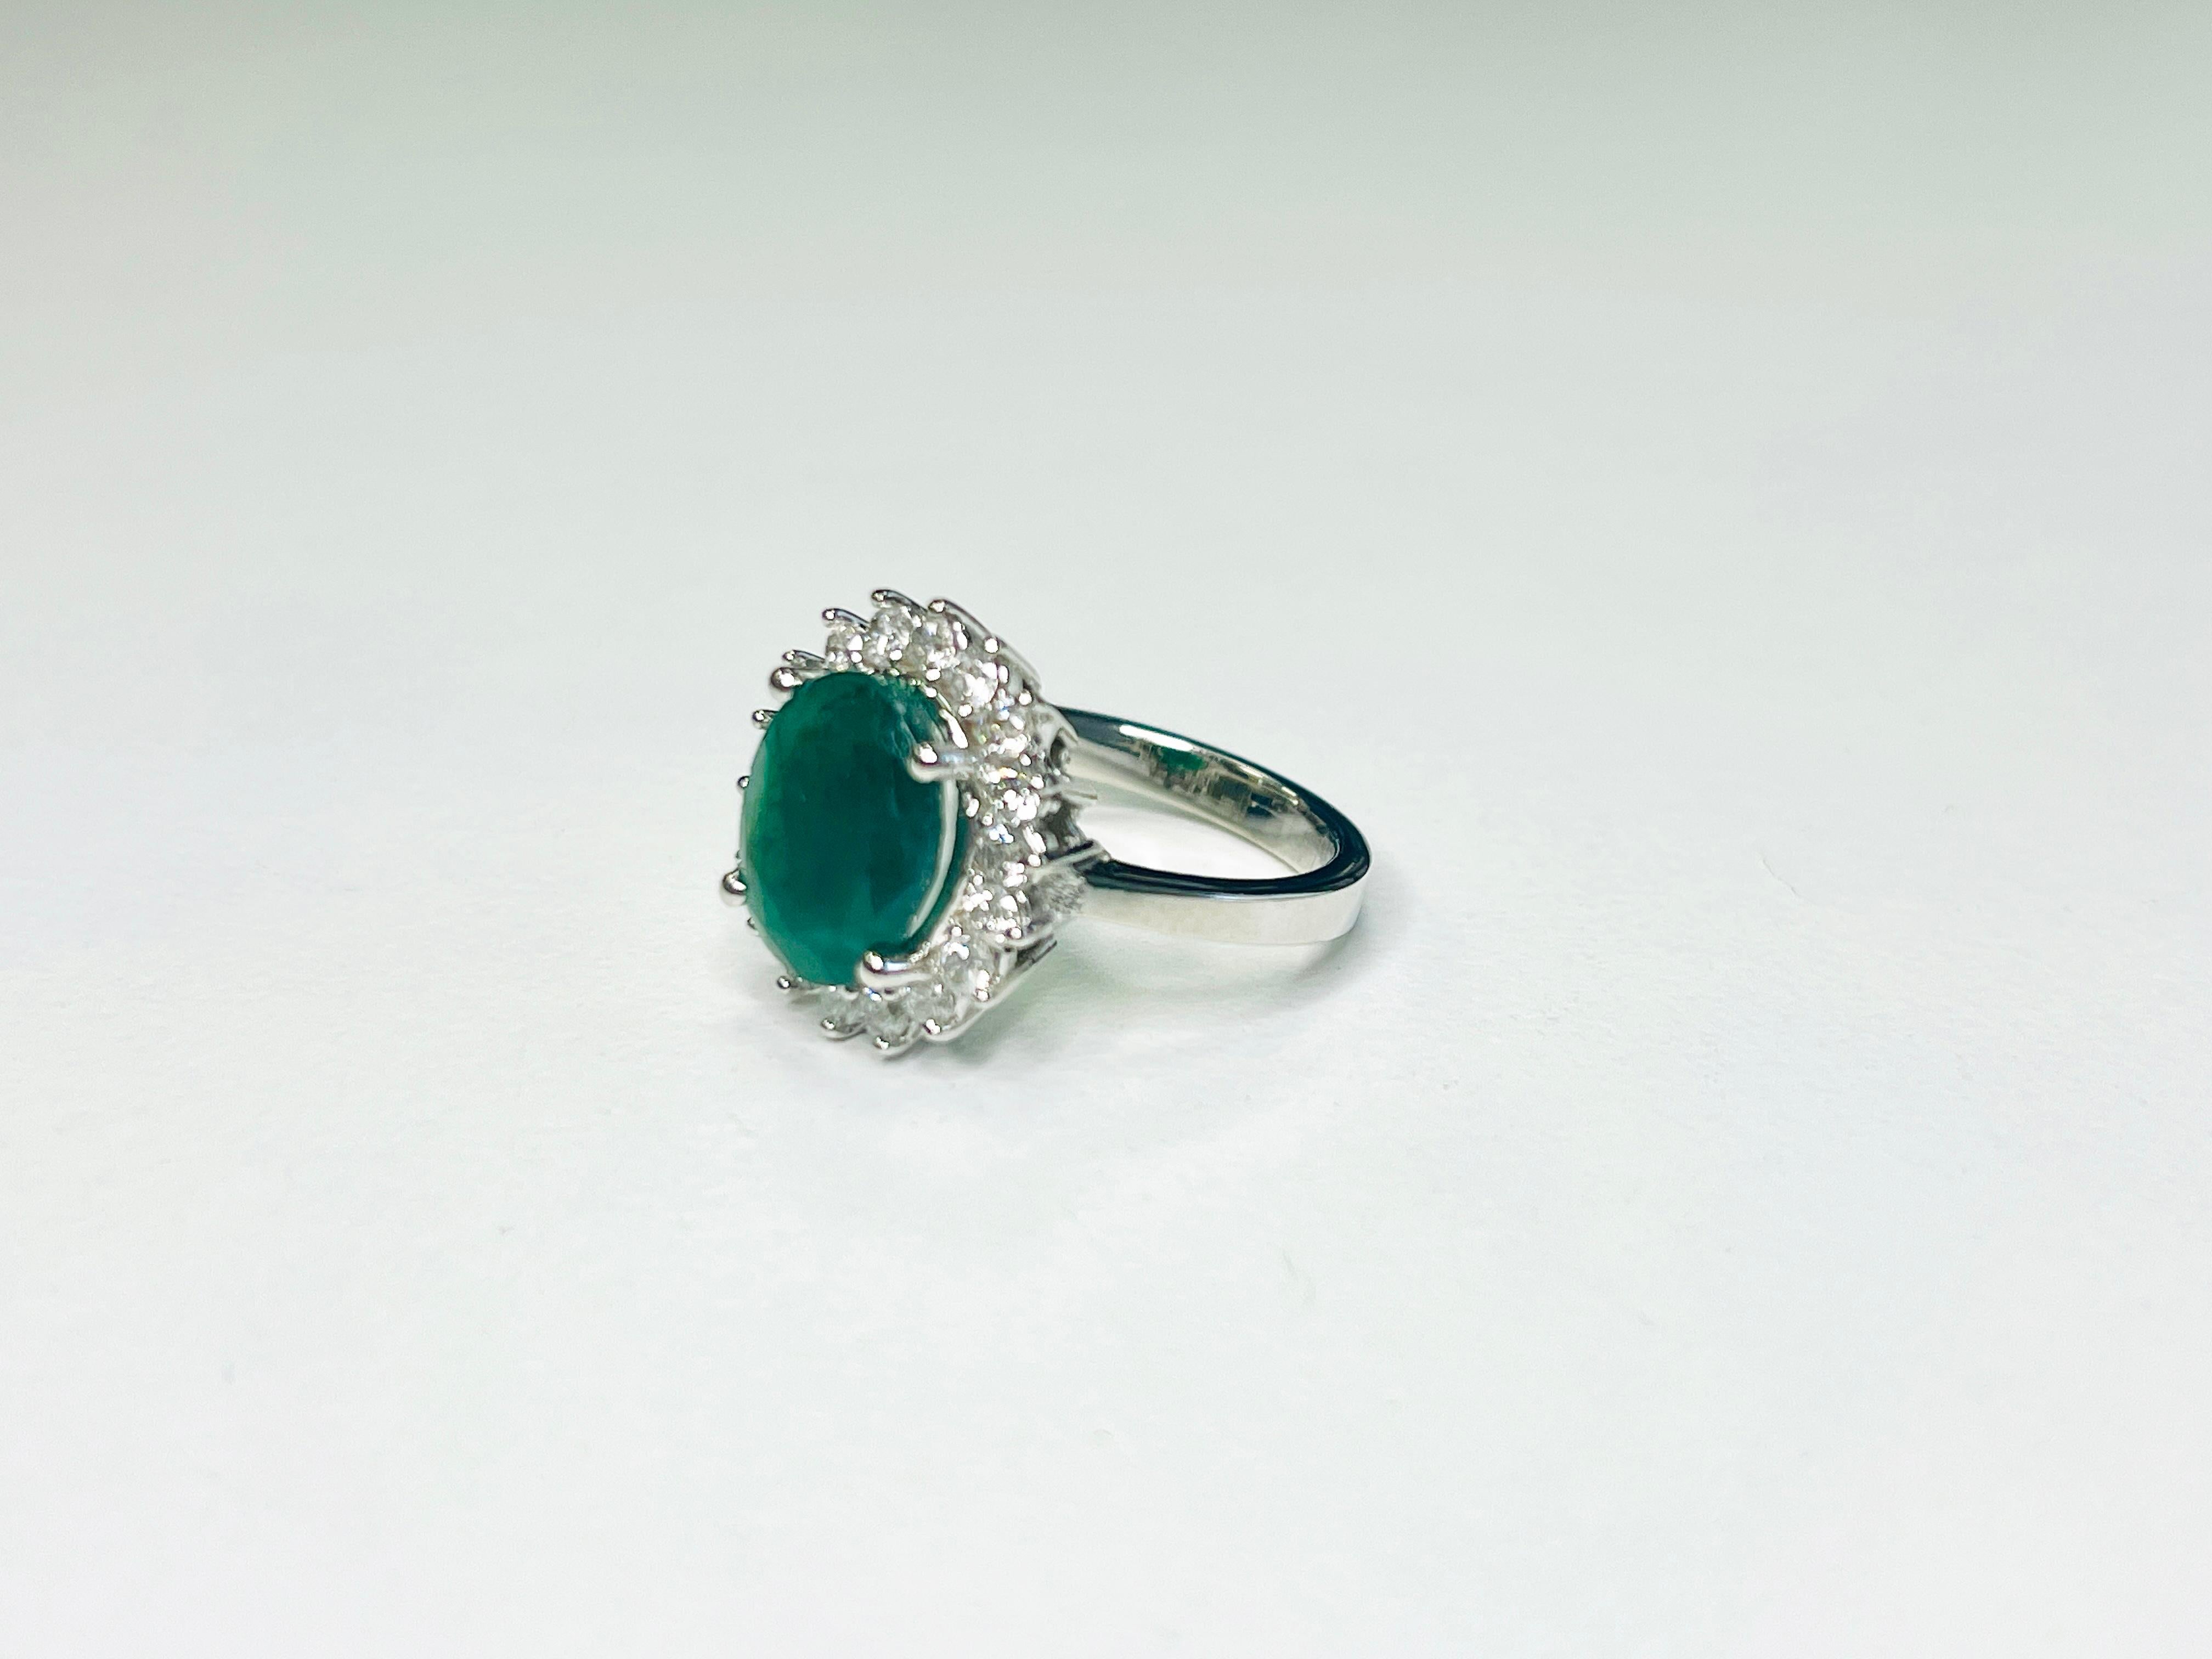 Oval Cut 2.87 Carat Emerald Diamond 14K White Gold Ring For Sale